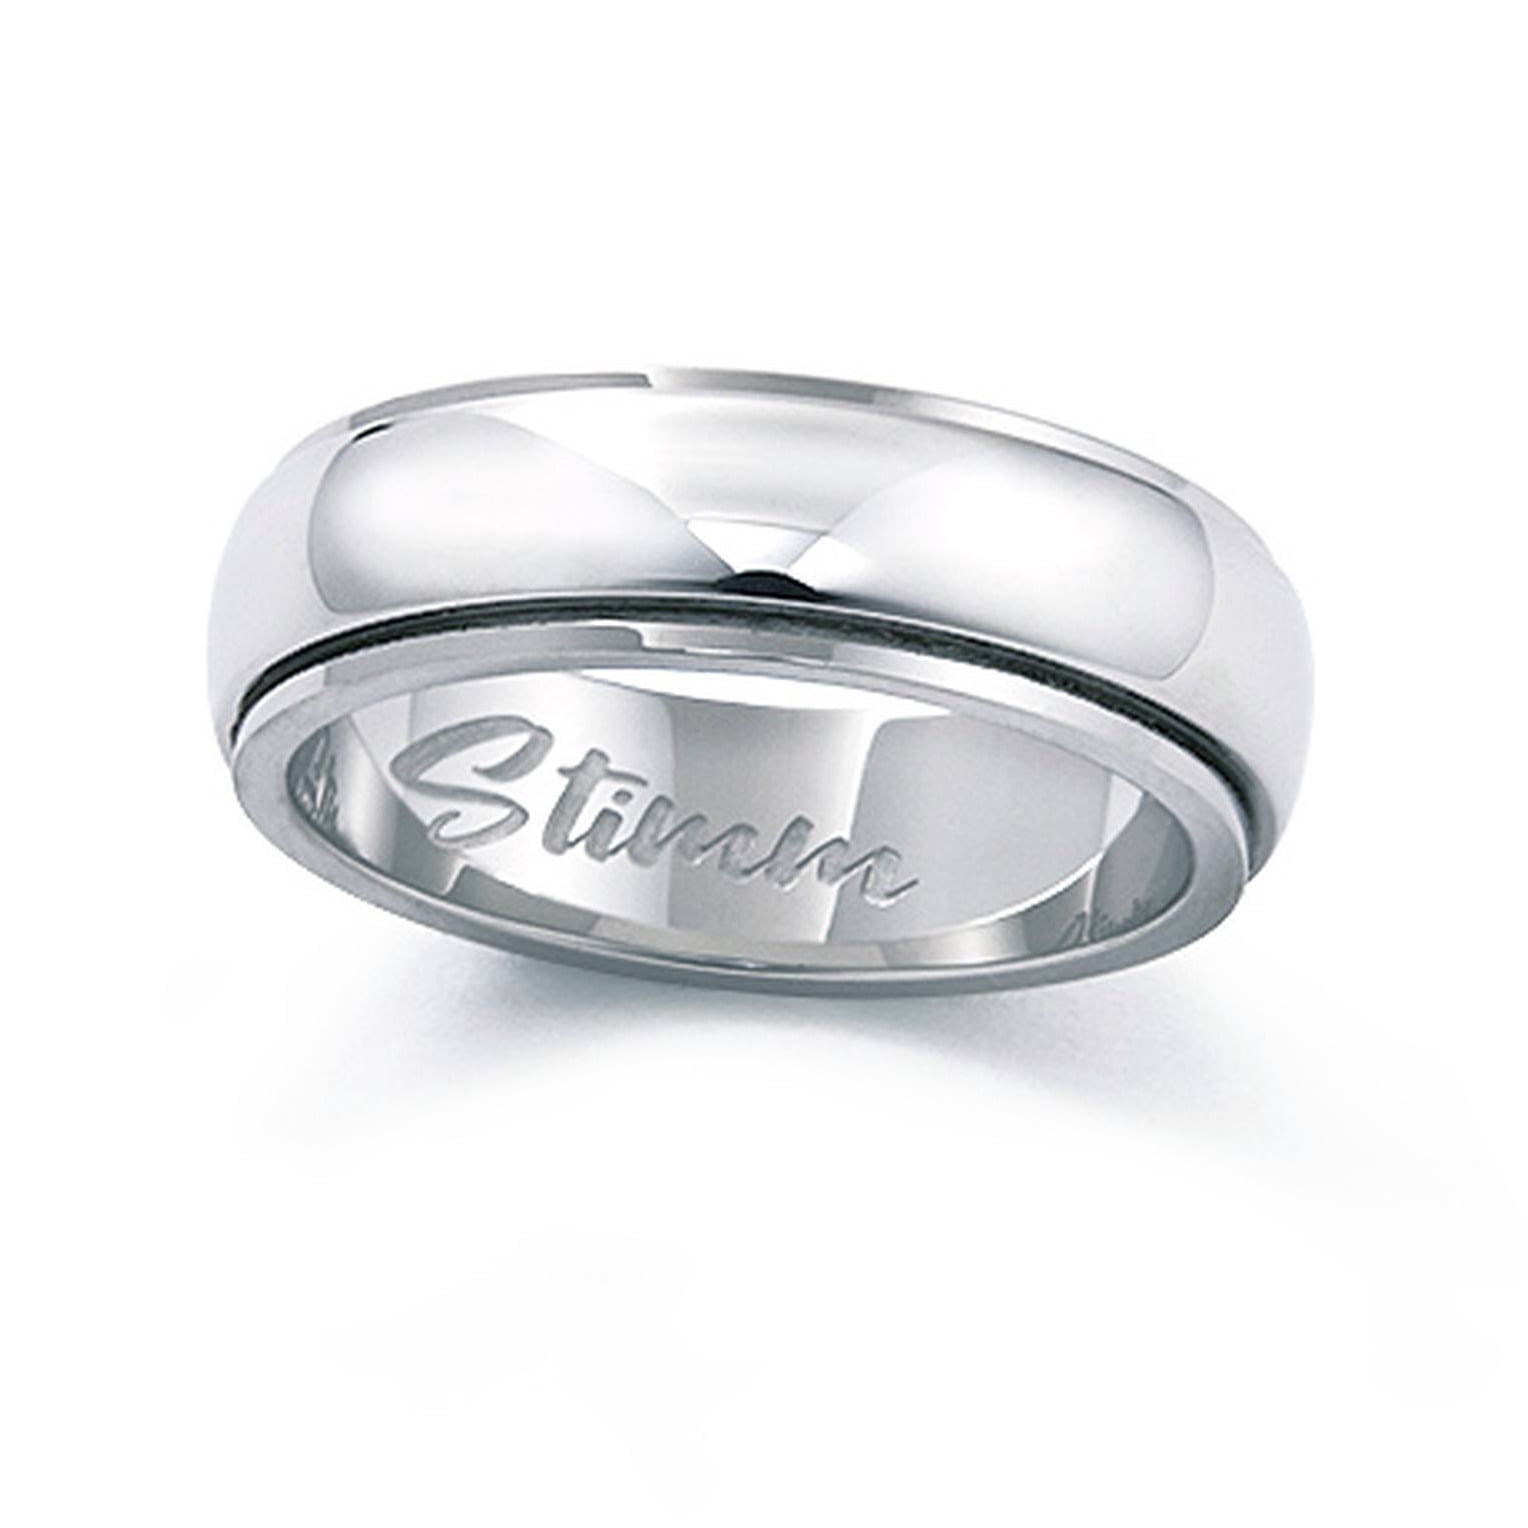 duif Strak volgorde Stimm Fidget Rings for Anxiety, Spinner Ring, Anti-Anxiety Rings for  Stress, Stainless Steel Rings for Women and Men - Walmart.com